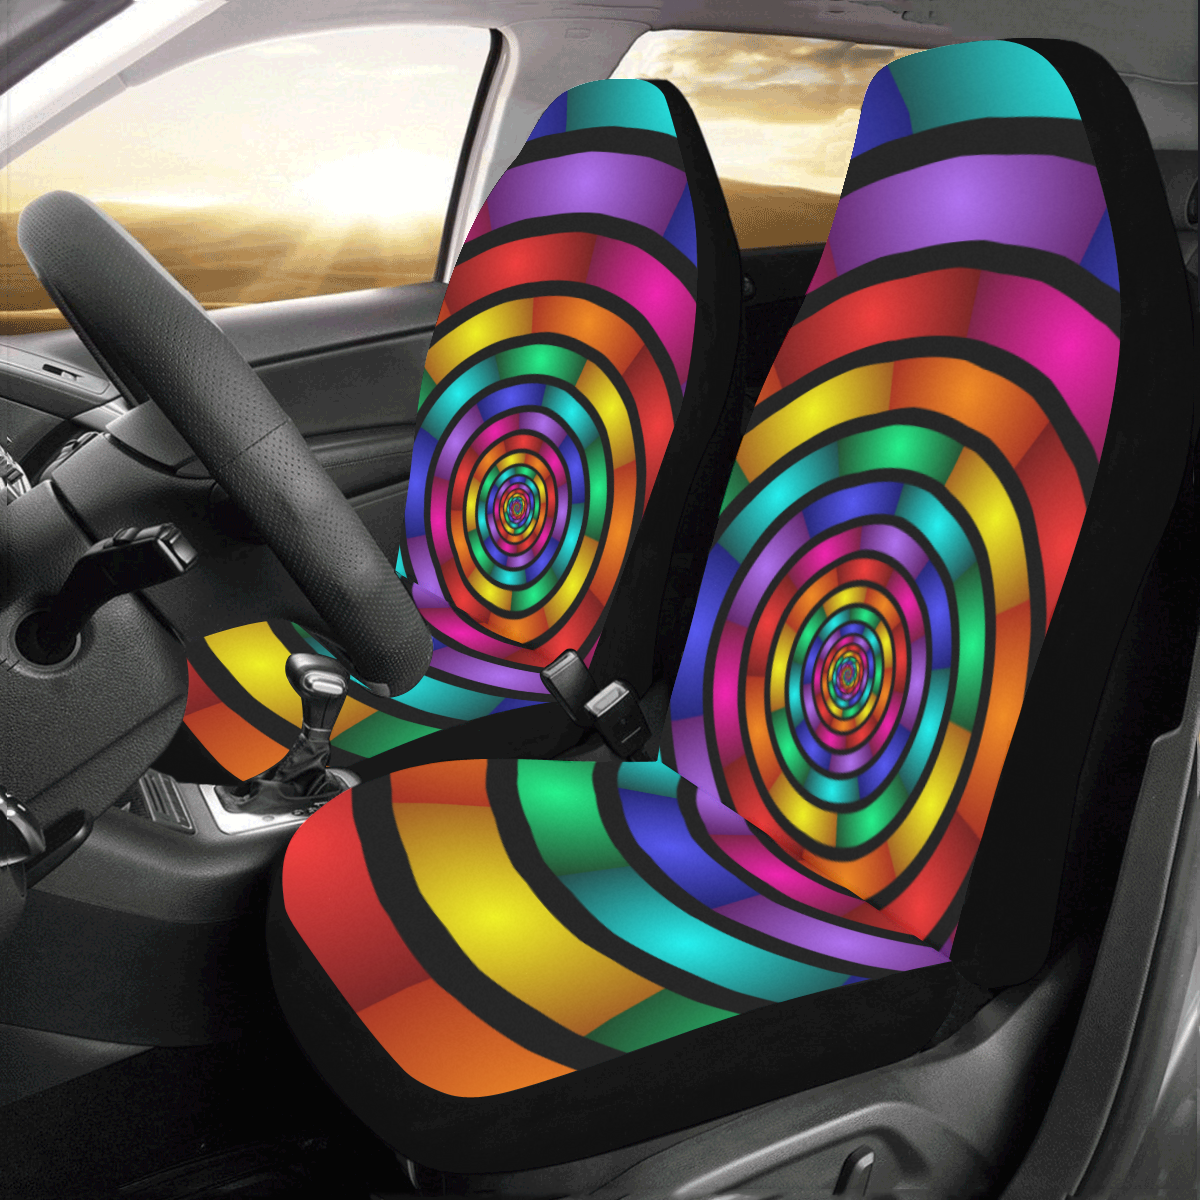 Round Psychedelic Colorful Modern Fractal Art Grahic Car Seat Covers (Set of 2)